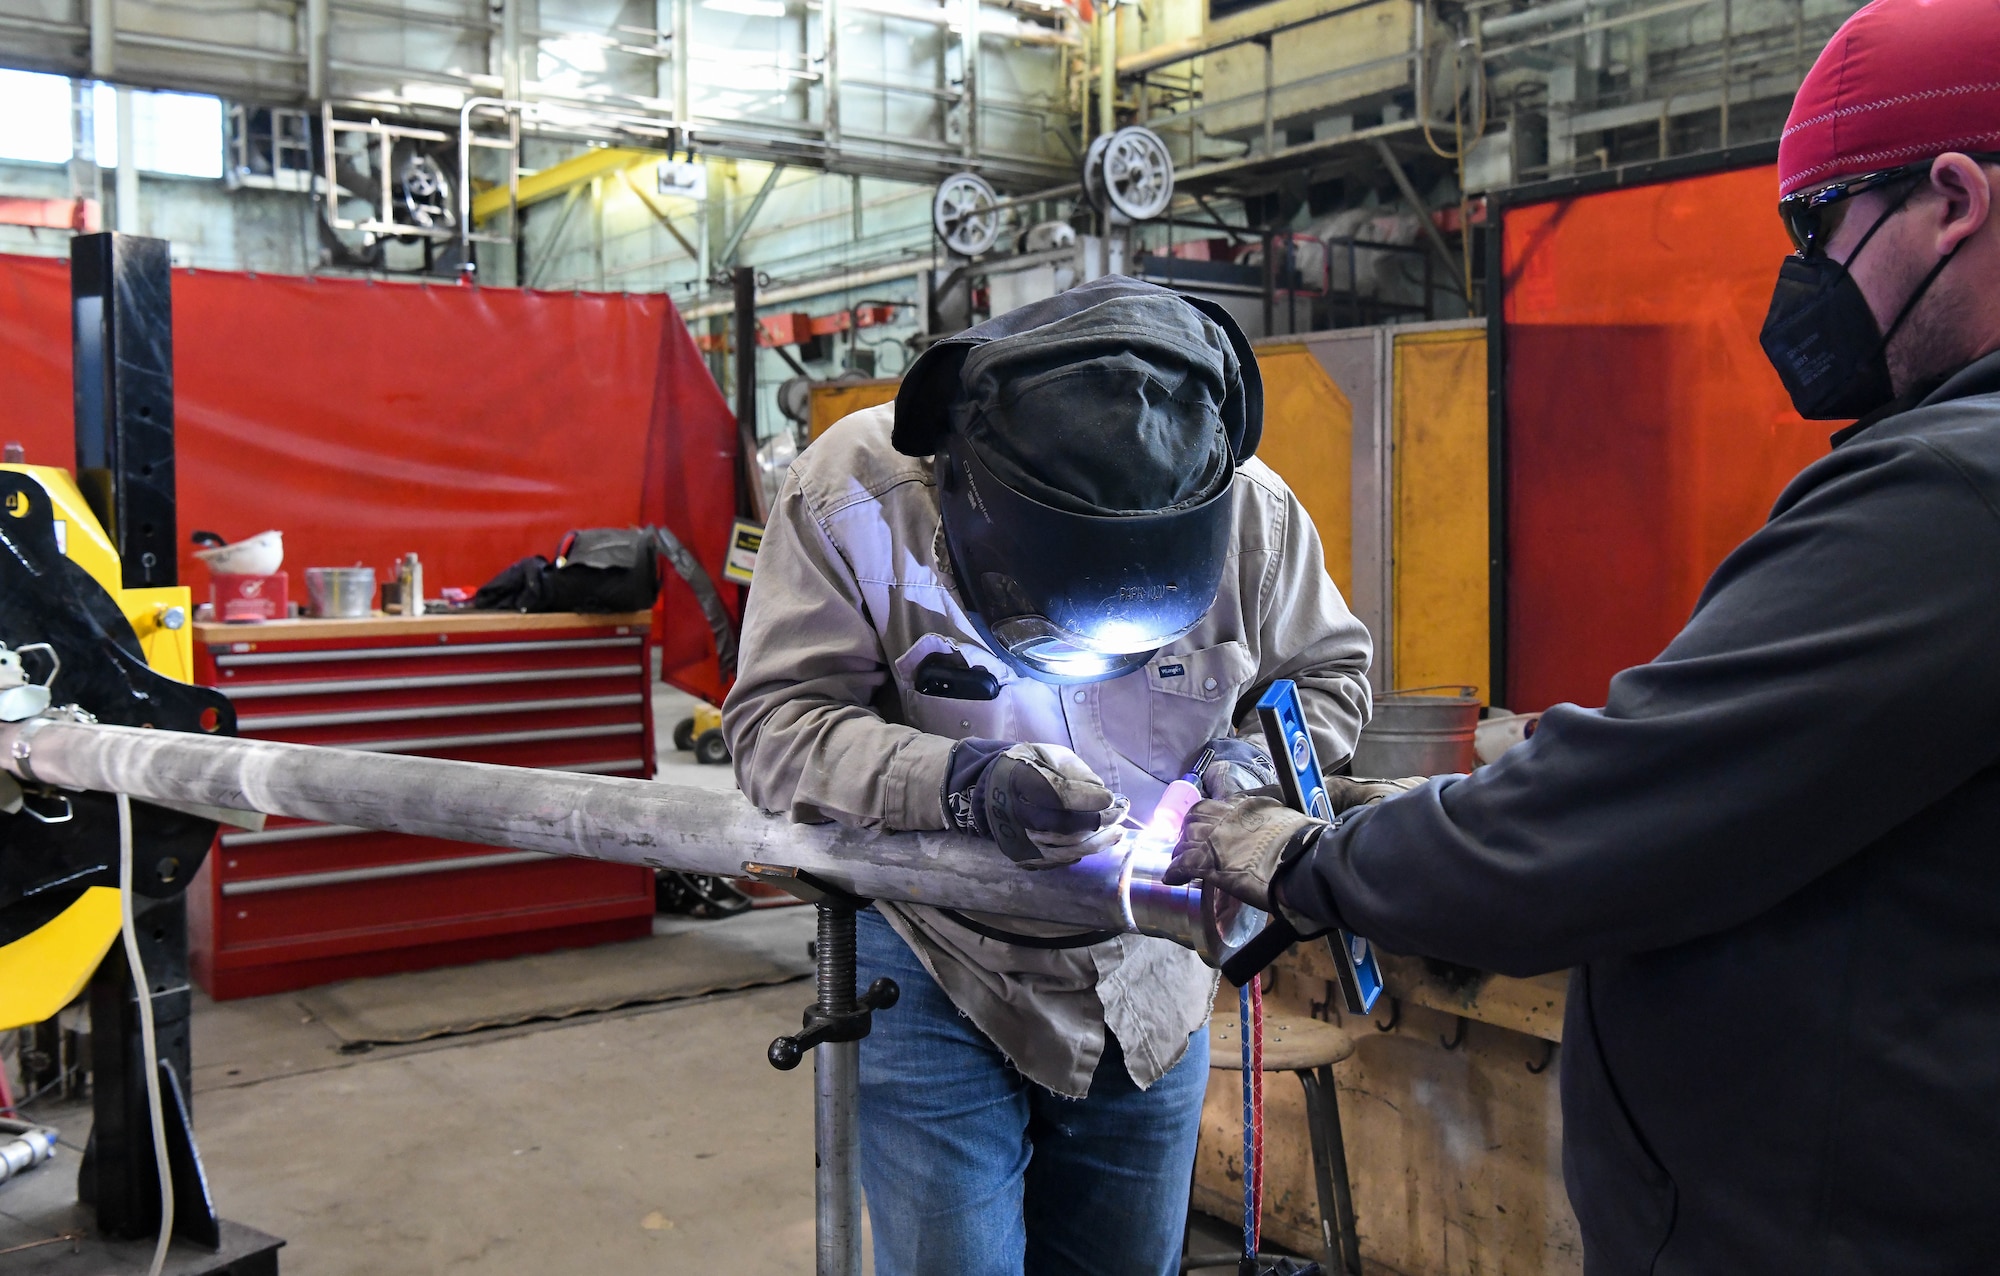 Dustin Williams, right, a pipefitter, holds a flange in place as fellow pipefitter Billy Joe Emberton places tack welds, March 4, 2021, at the Model Shop at Arnold Air Force Base, Tenn. April is National Welding Month. (U.S. Air Force photo by Jill Pickett)